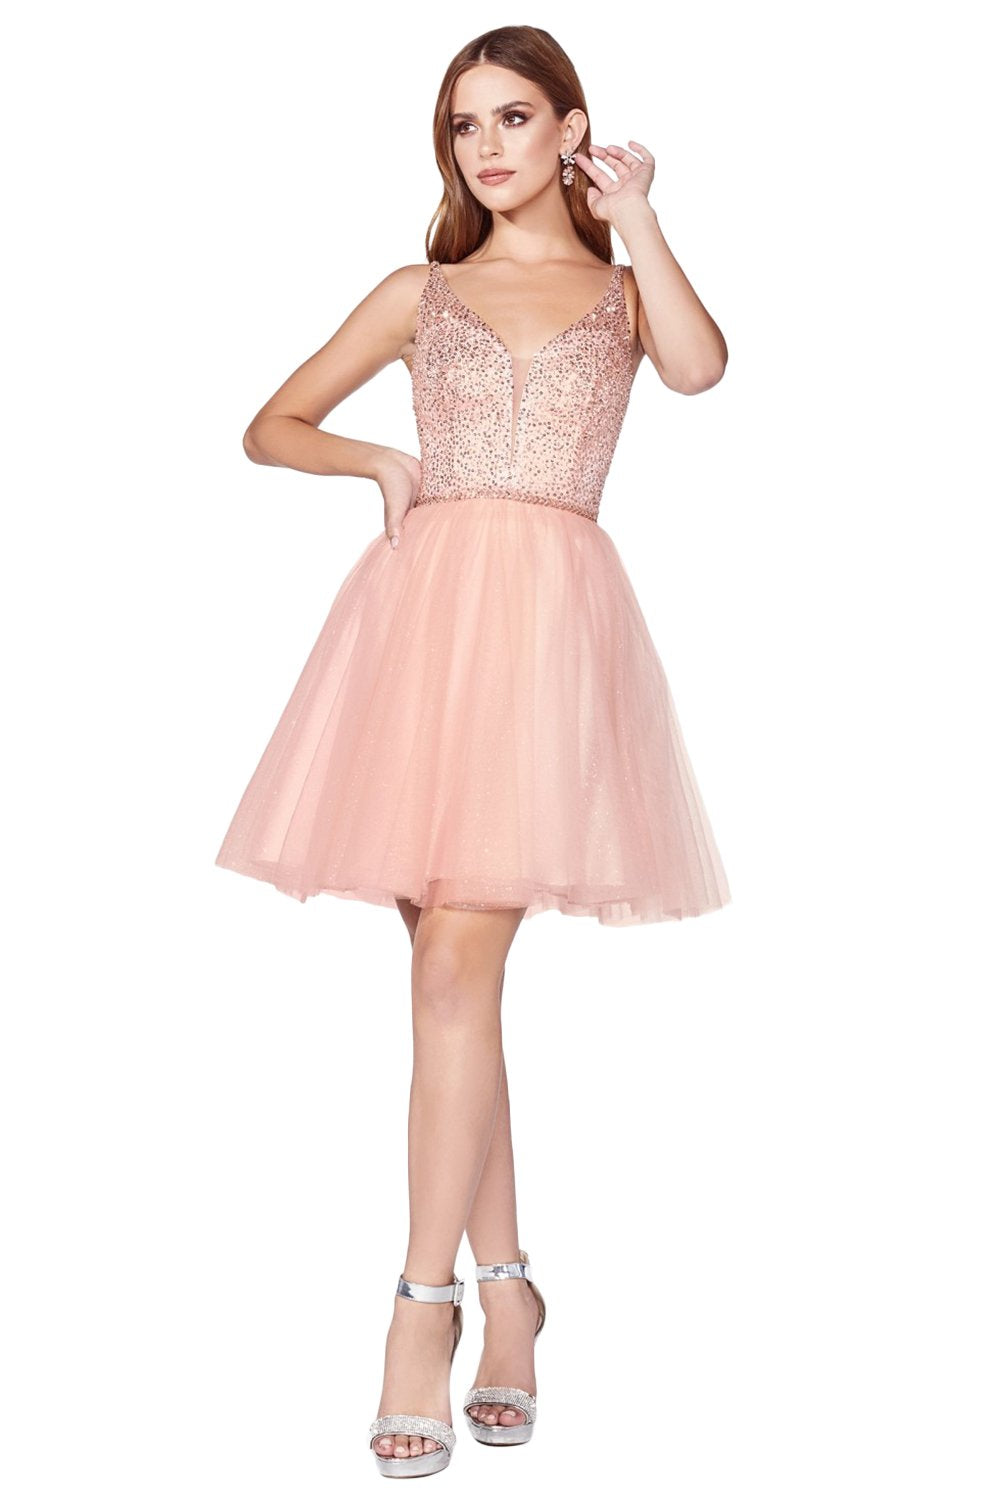 Cinderella Divine - CD0149 Beaded Top Glitter Tulle Cocktail Dress In Pink and Orange